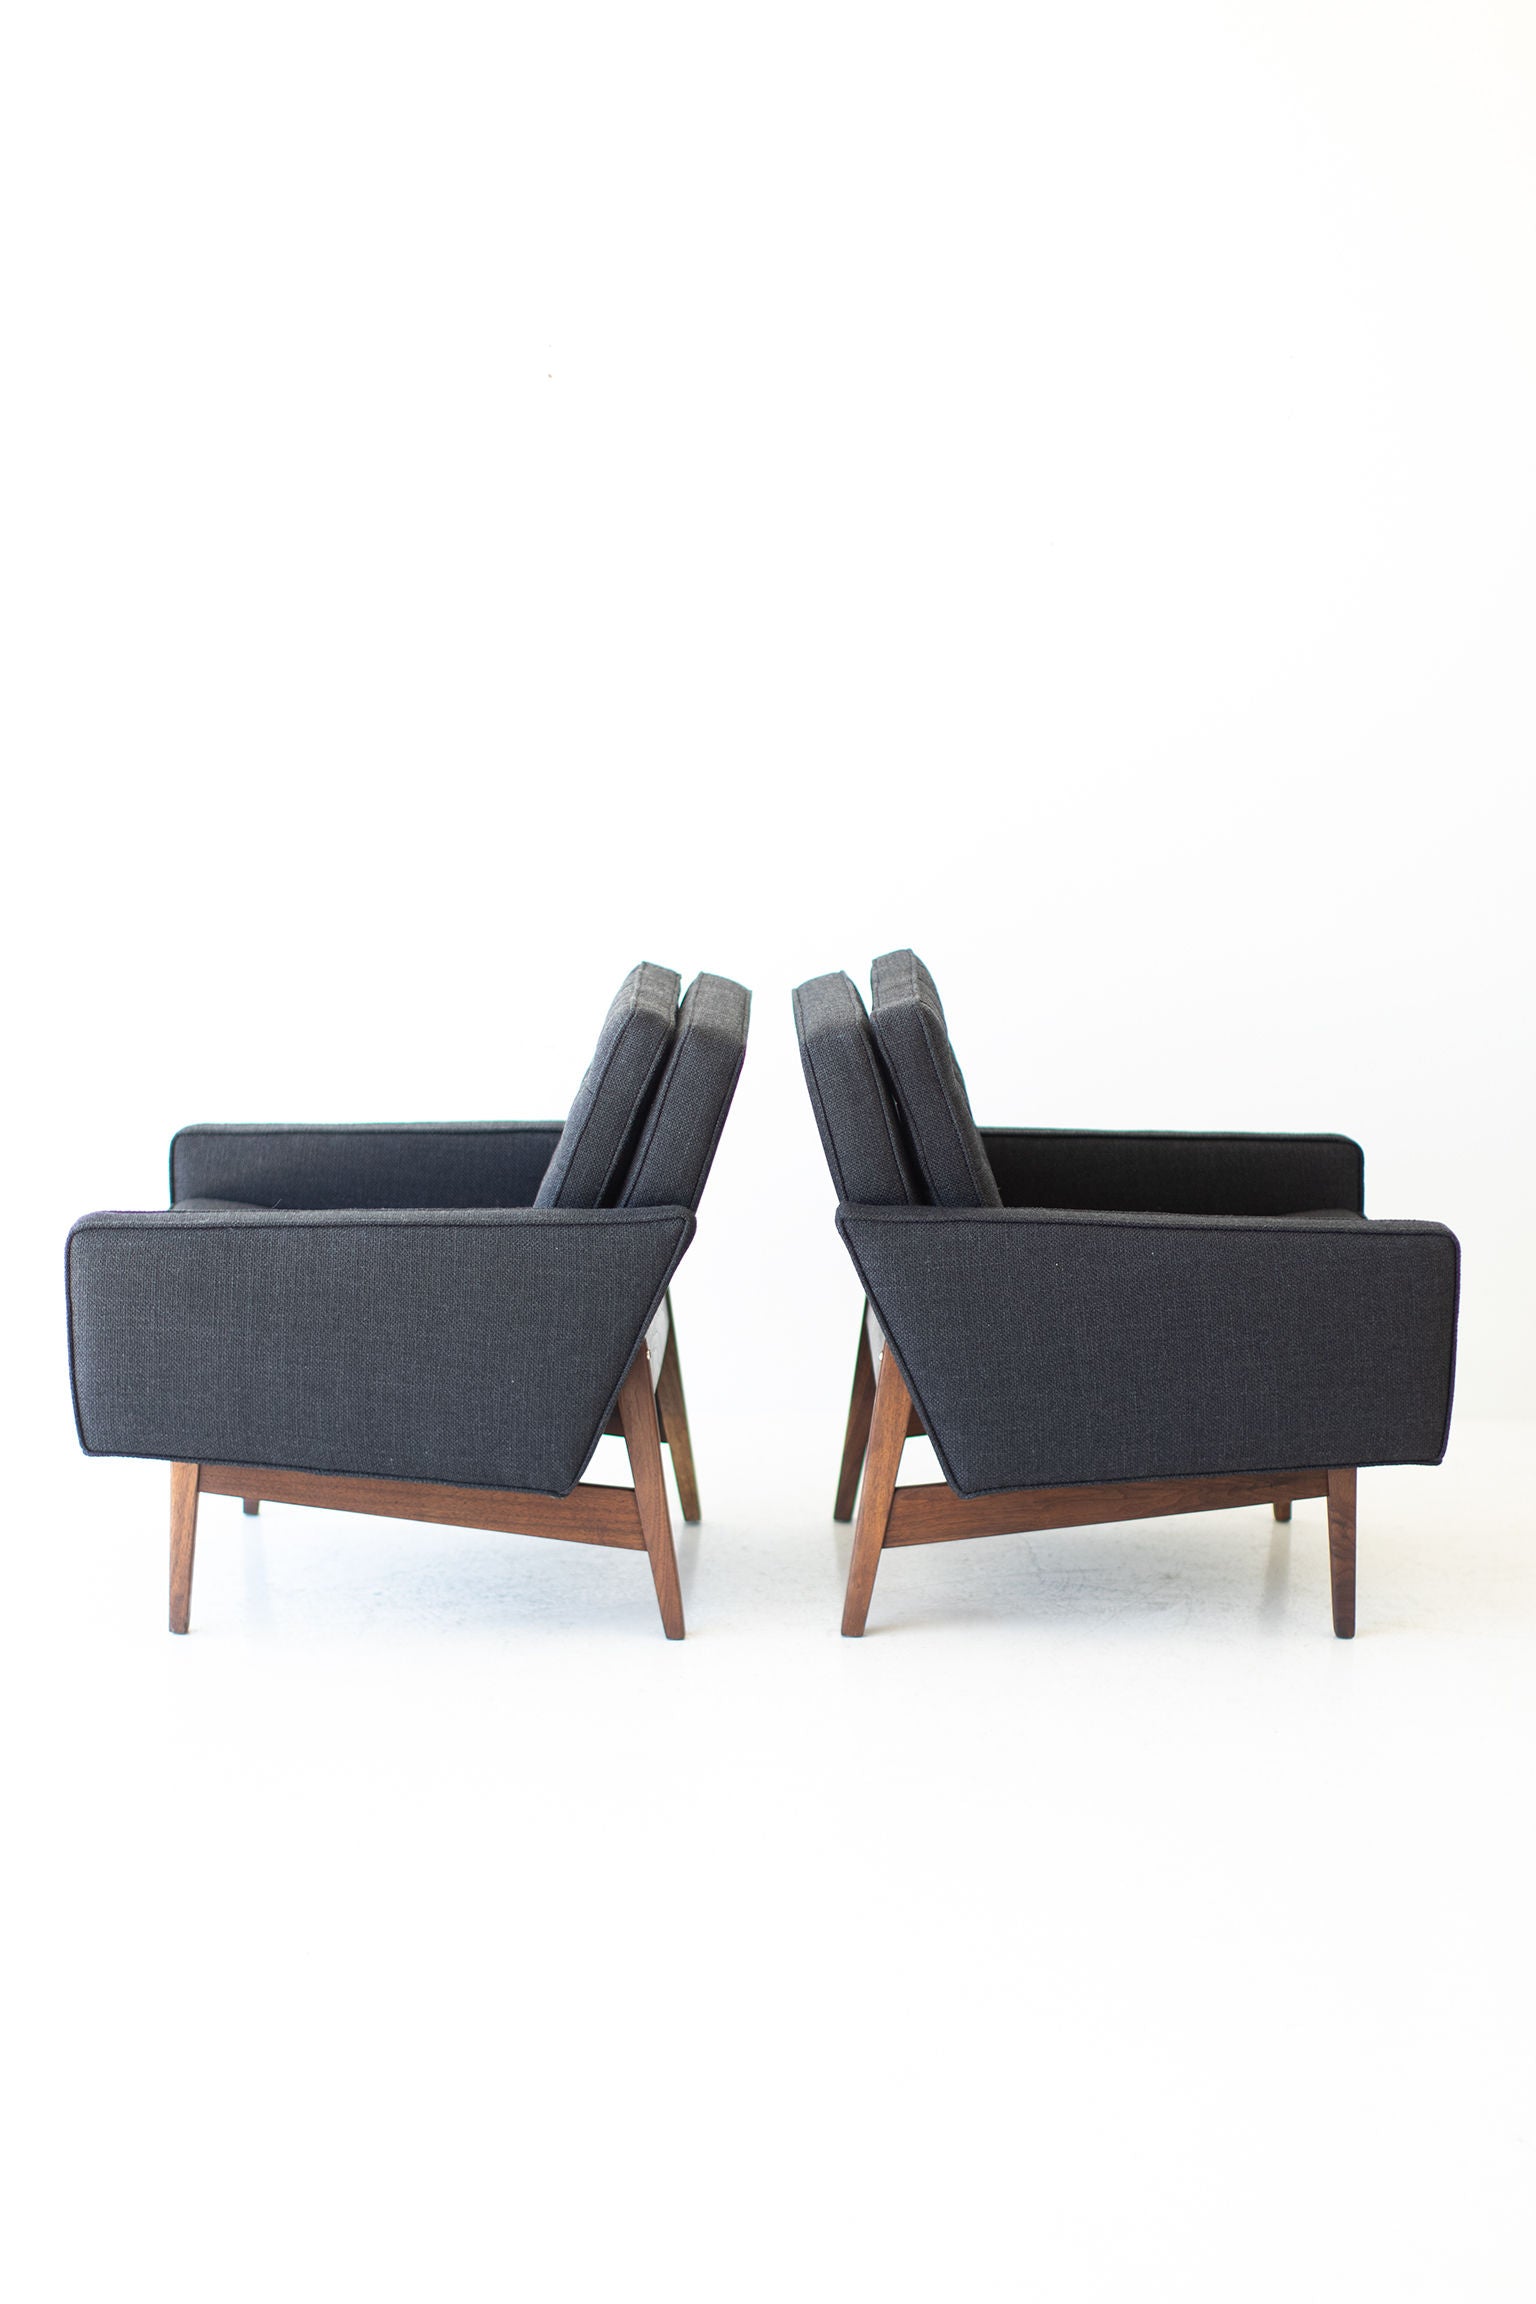 Jack Cartwright Lounge Chairs for Founders Furniture